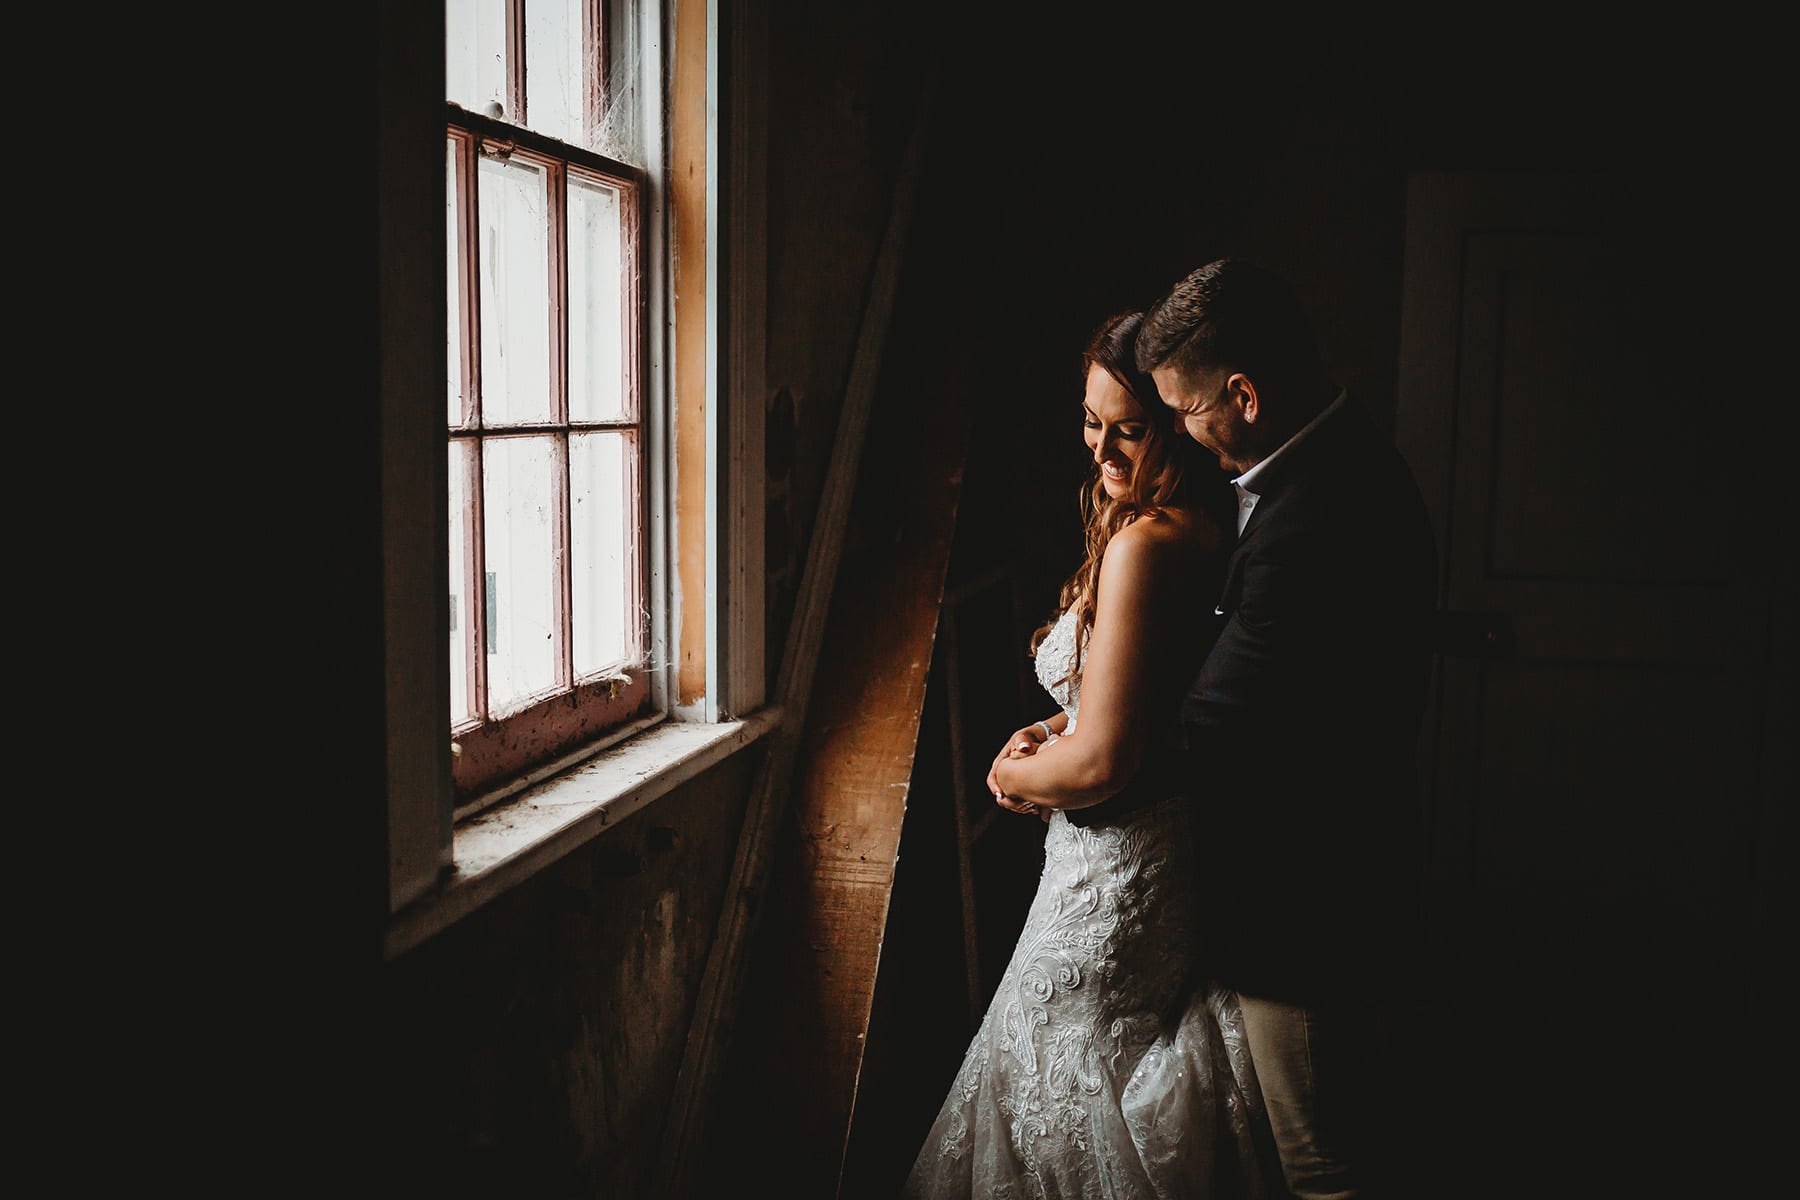 Bride and groom standing in Gledswood Homestead, lit by a small window as they cuddle